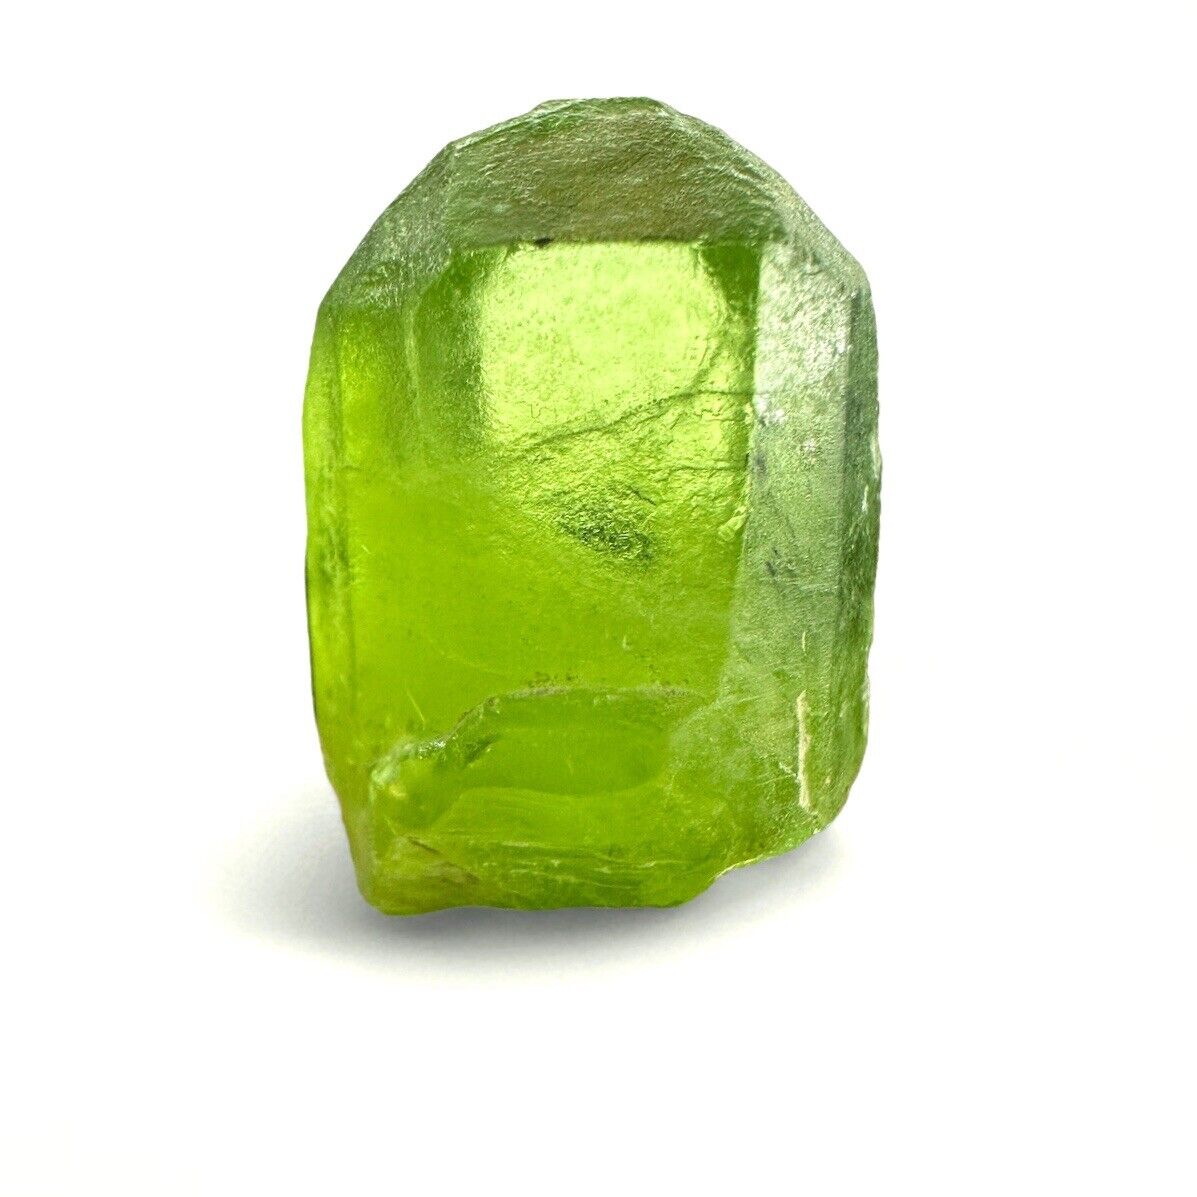 47 Carat Peridot Gemmy crystal with complete termination from Supat Gali, North